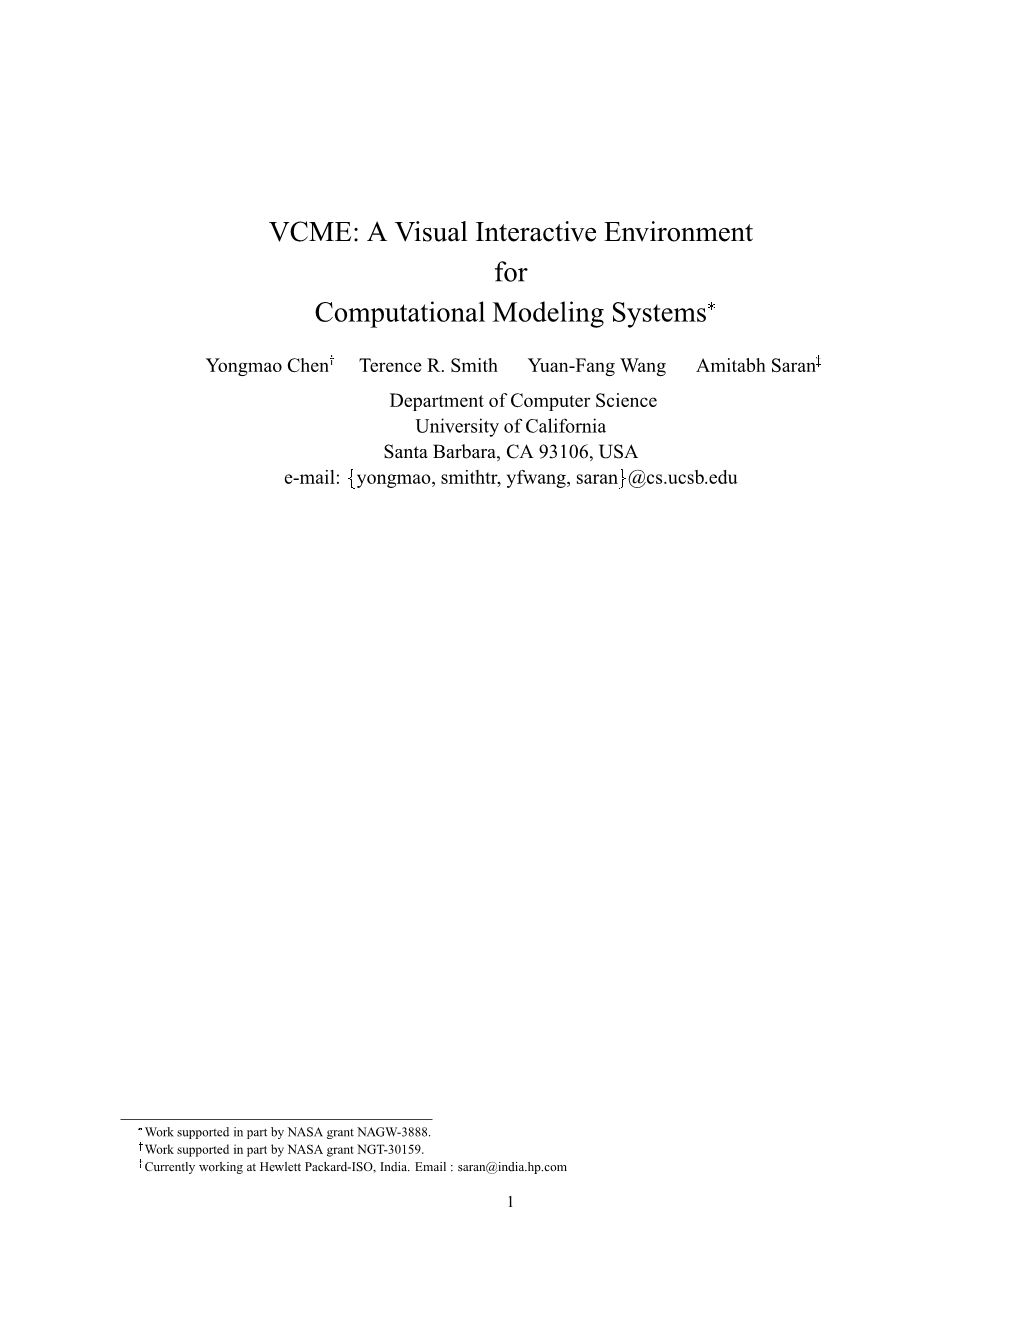 VCME: a Visual Interactive Environment for Computational Modeling Systems